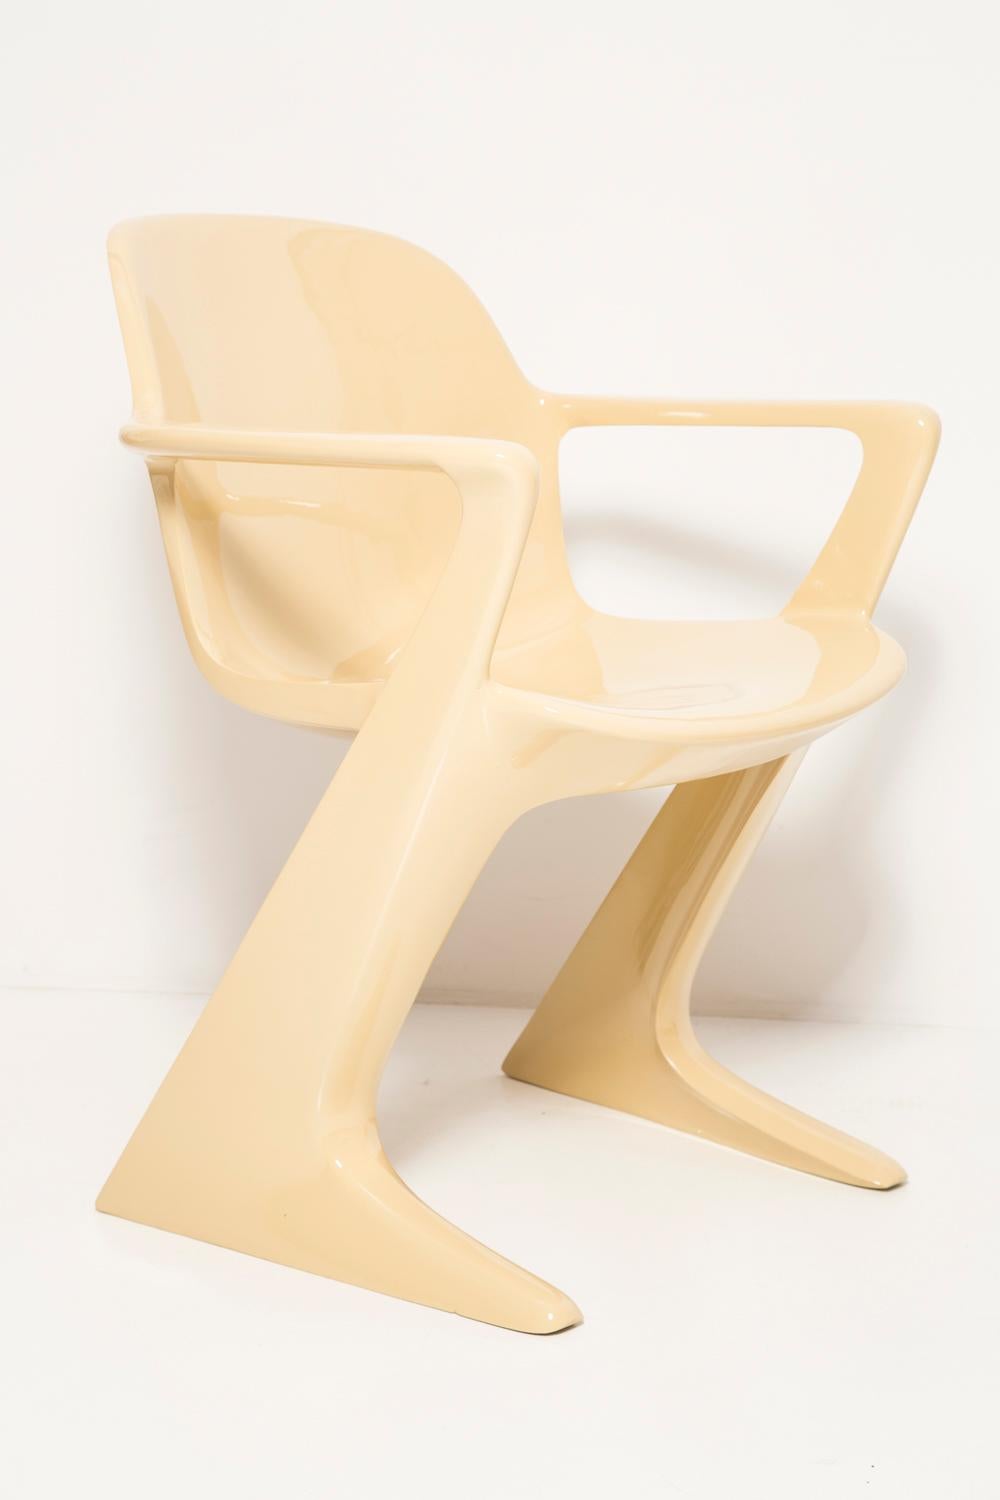 Lacquered Midcentury Beige Kangaroo Chair Designed by Ernst Moeckl, Germany, 1968 For Sale